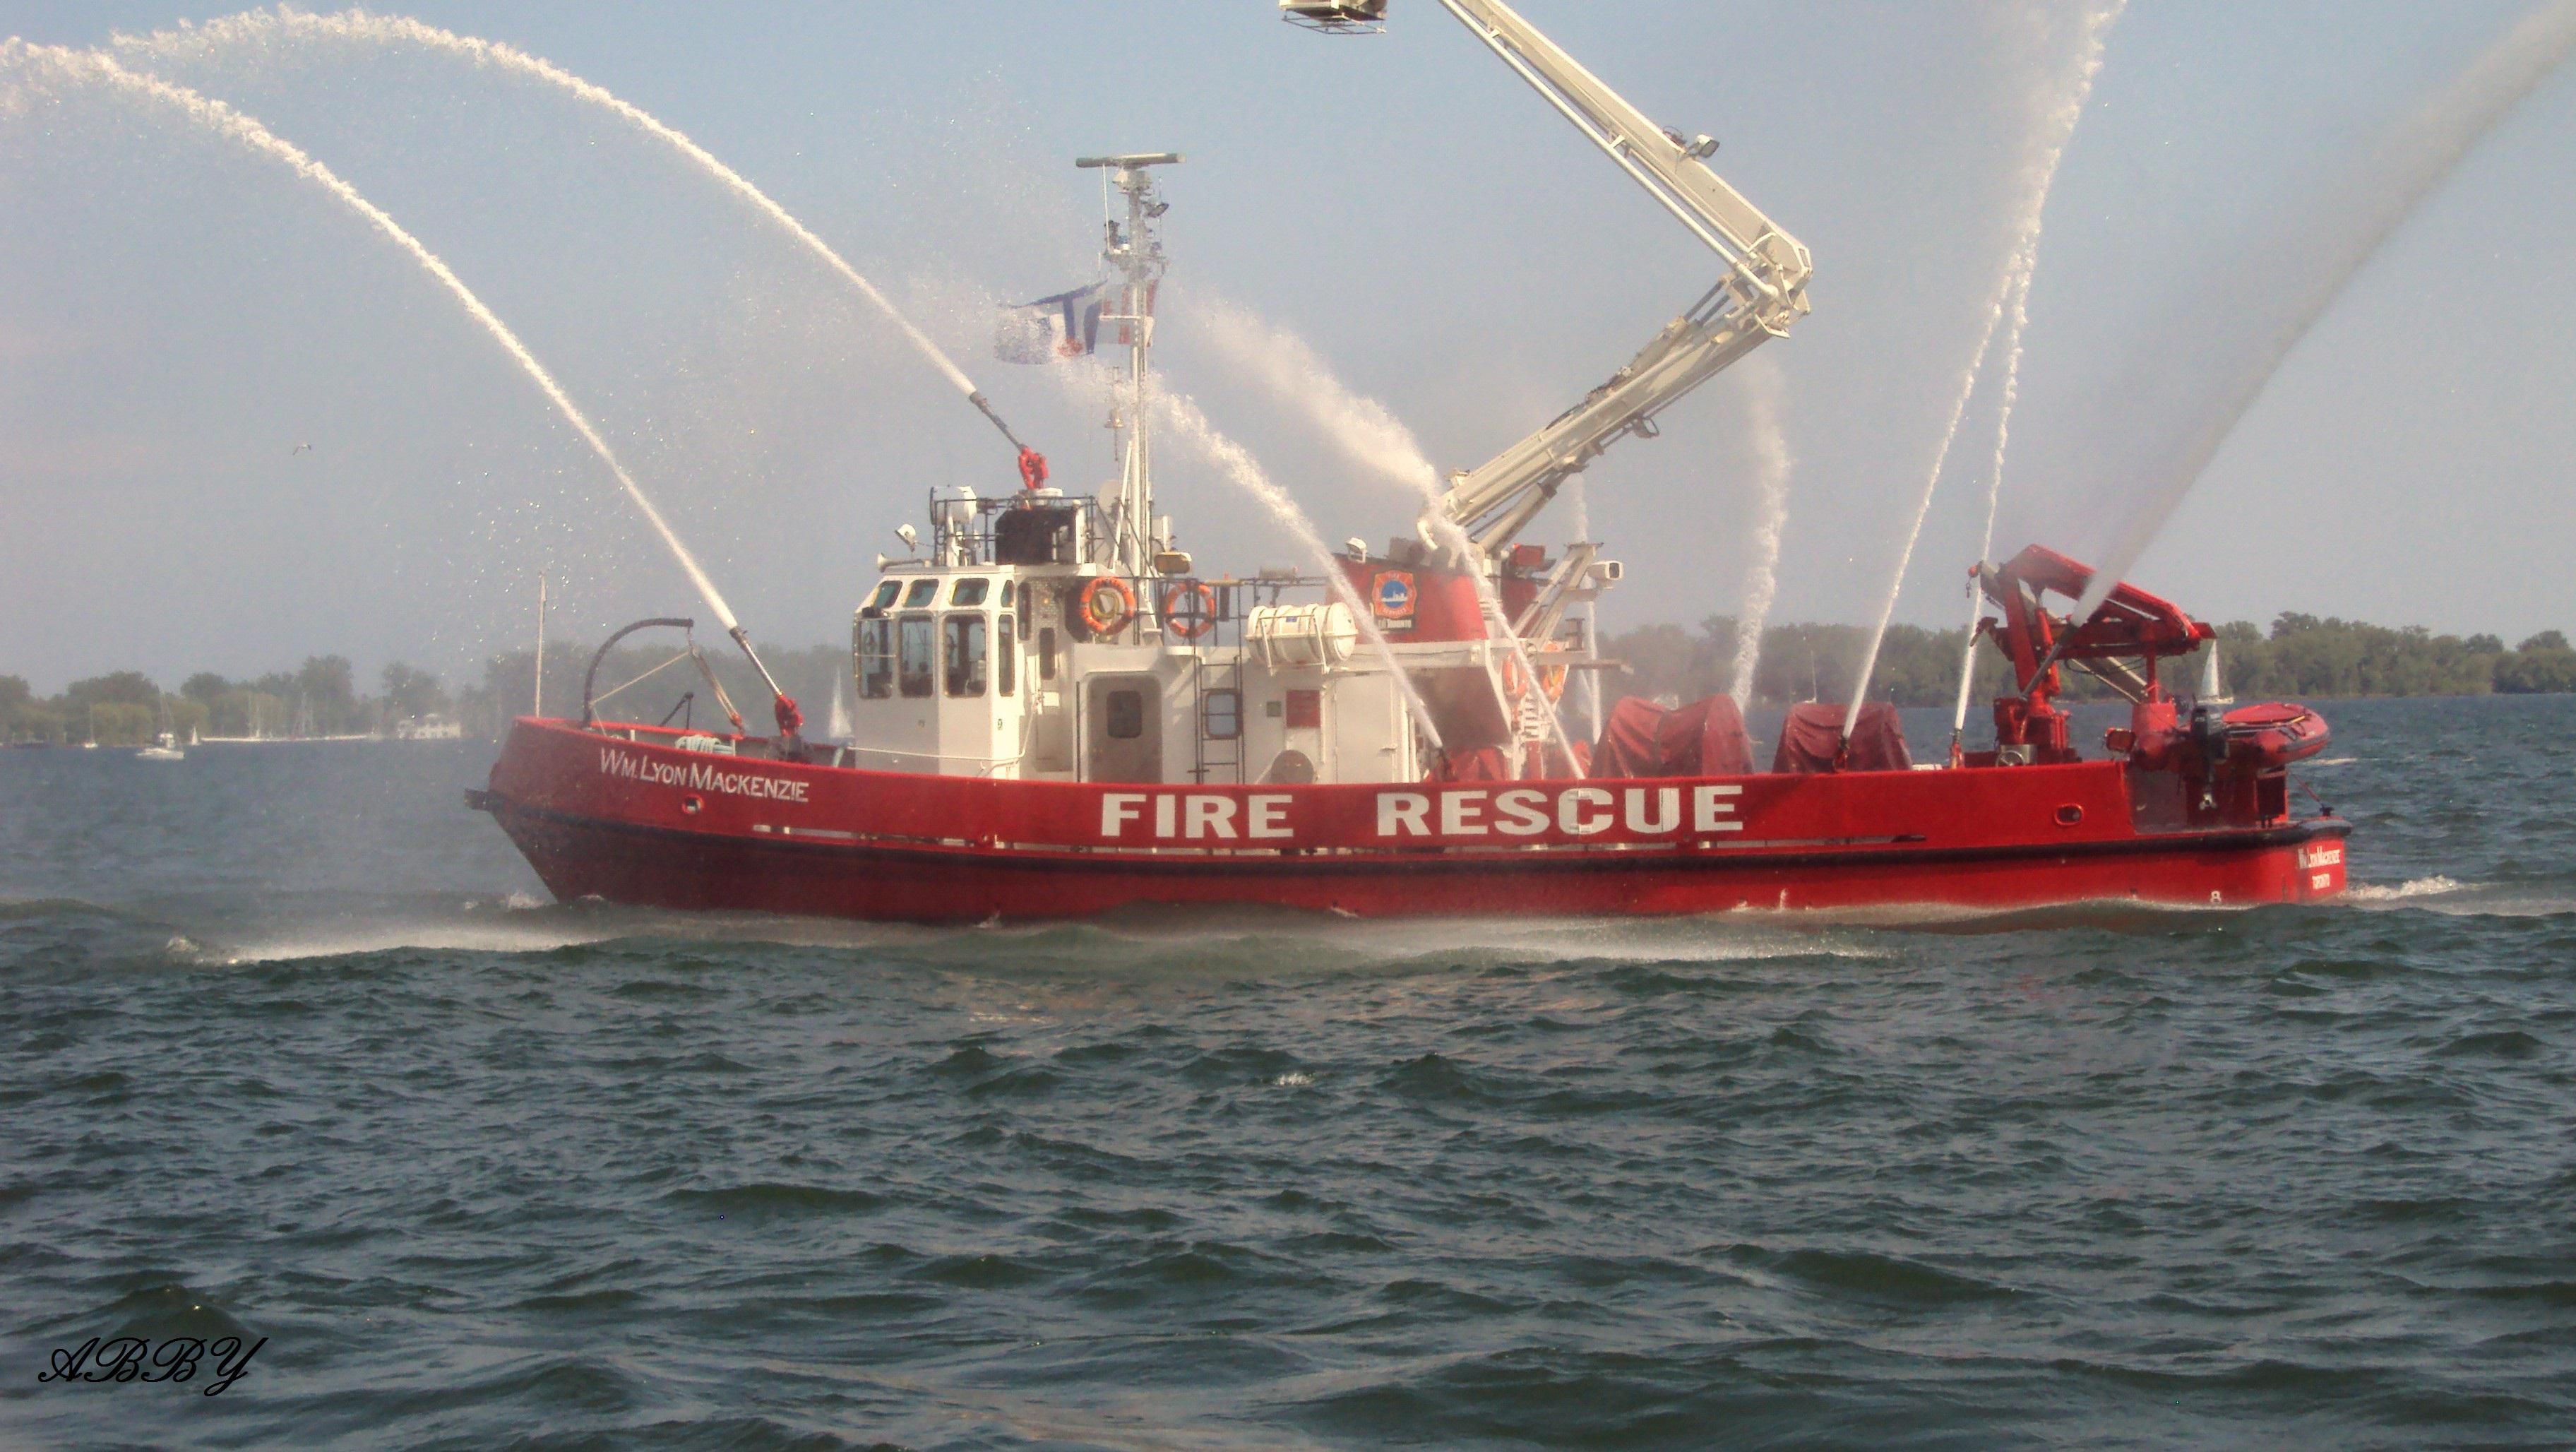 Fire rescue boats - (#104605) - High Quality and Resolution ...